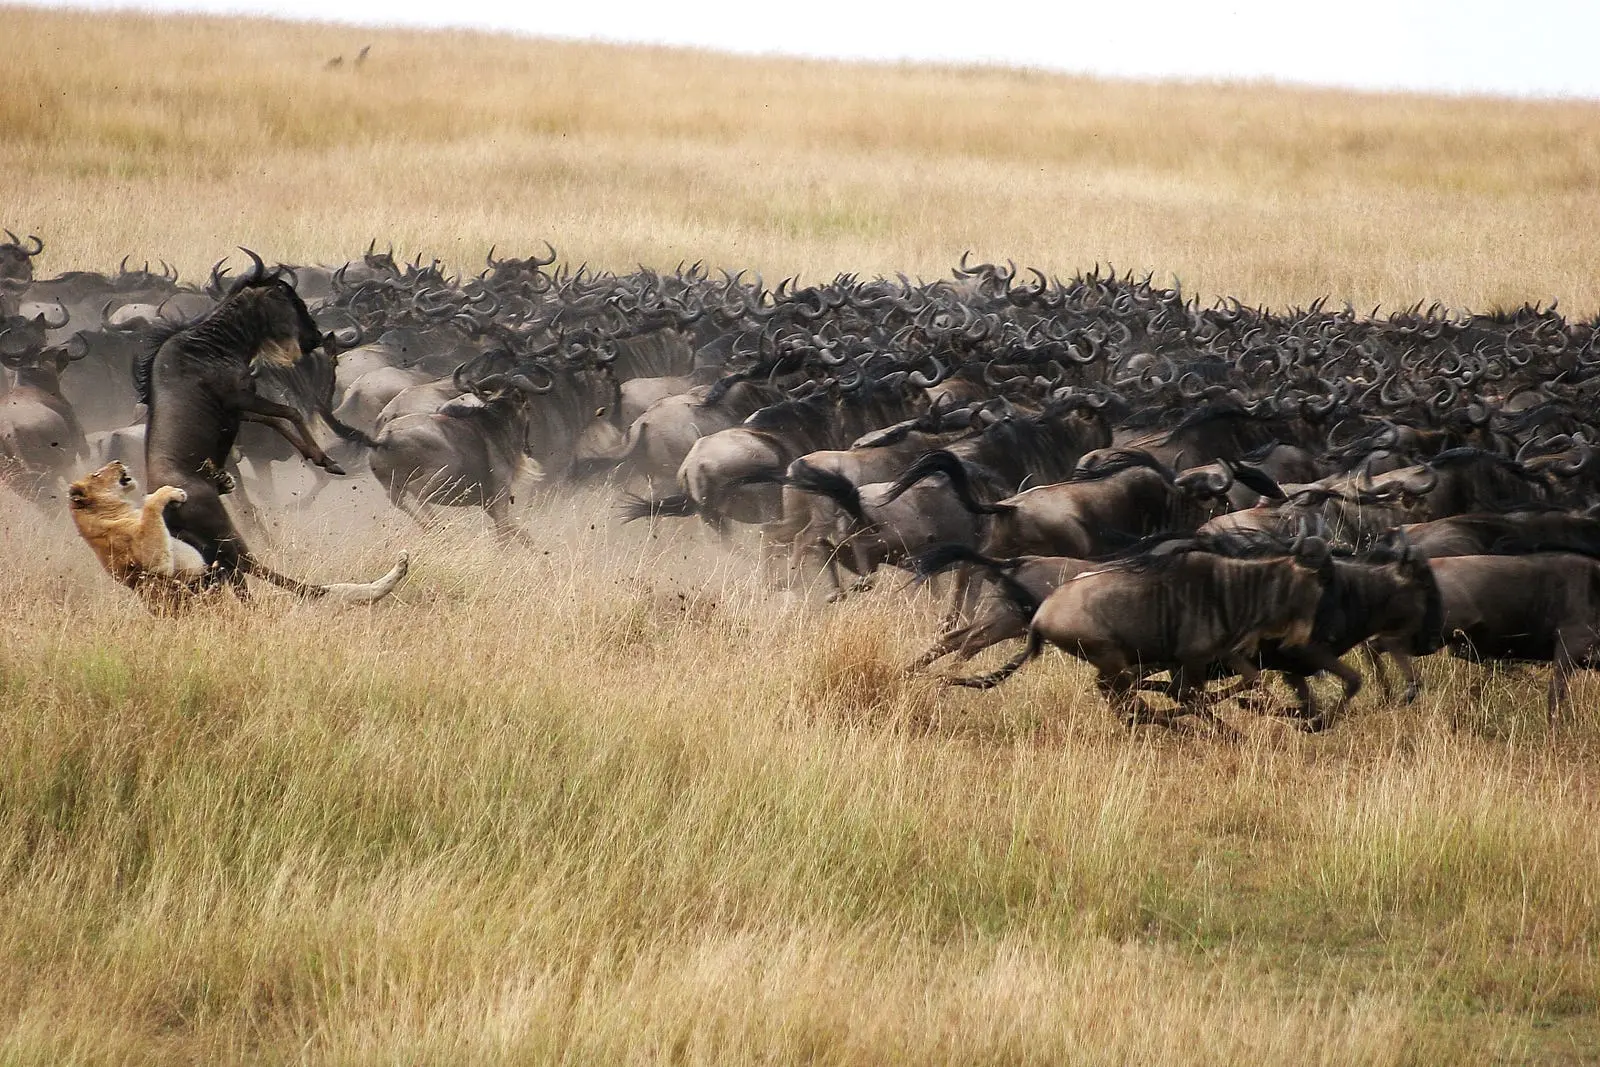 The great migration is a matter of life and death